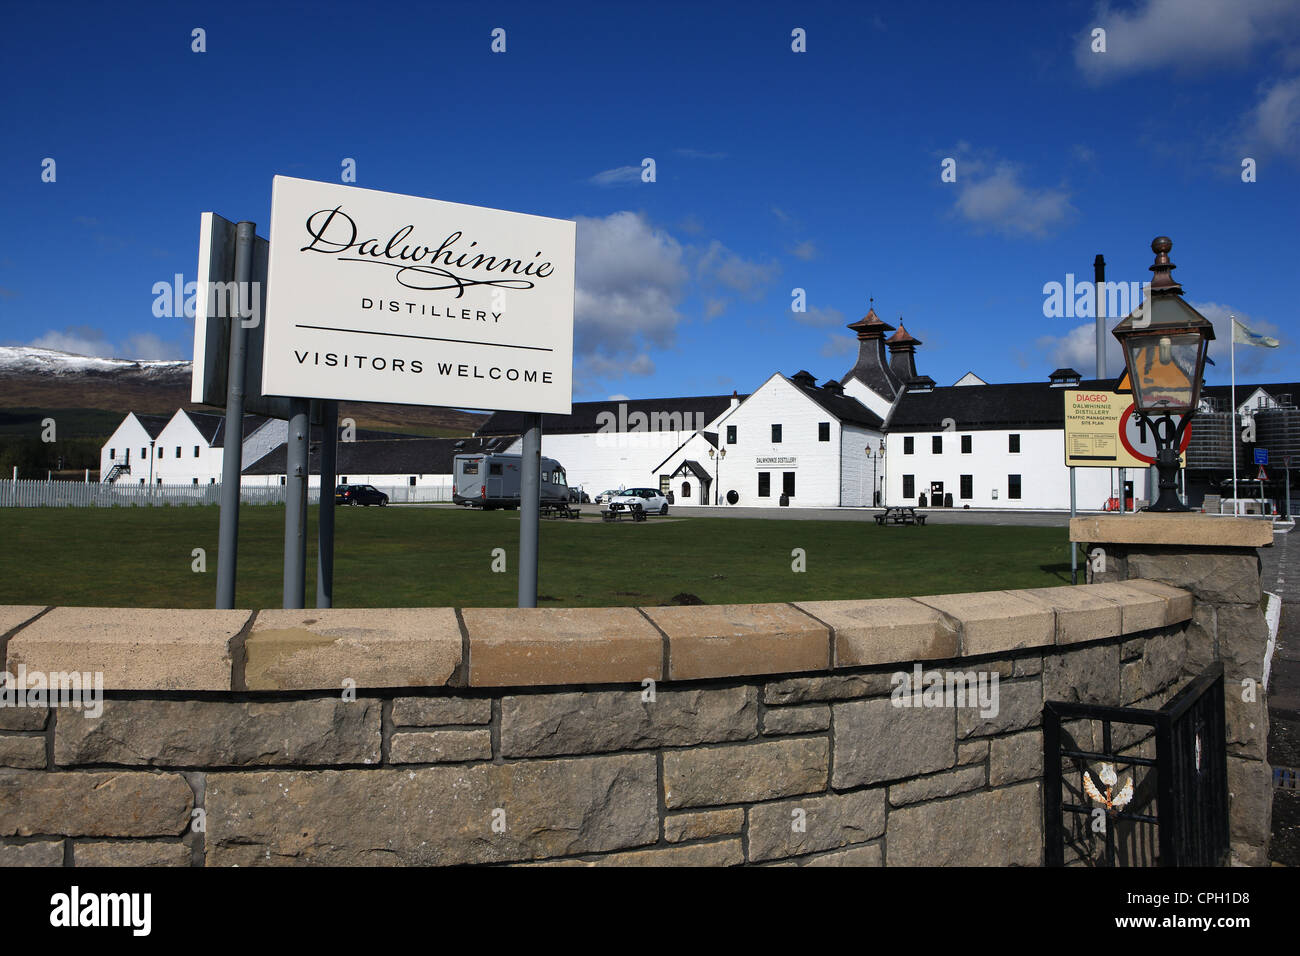 Dalwhinnie Distillery in the Scottish highlands Stock Photo